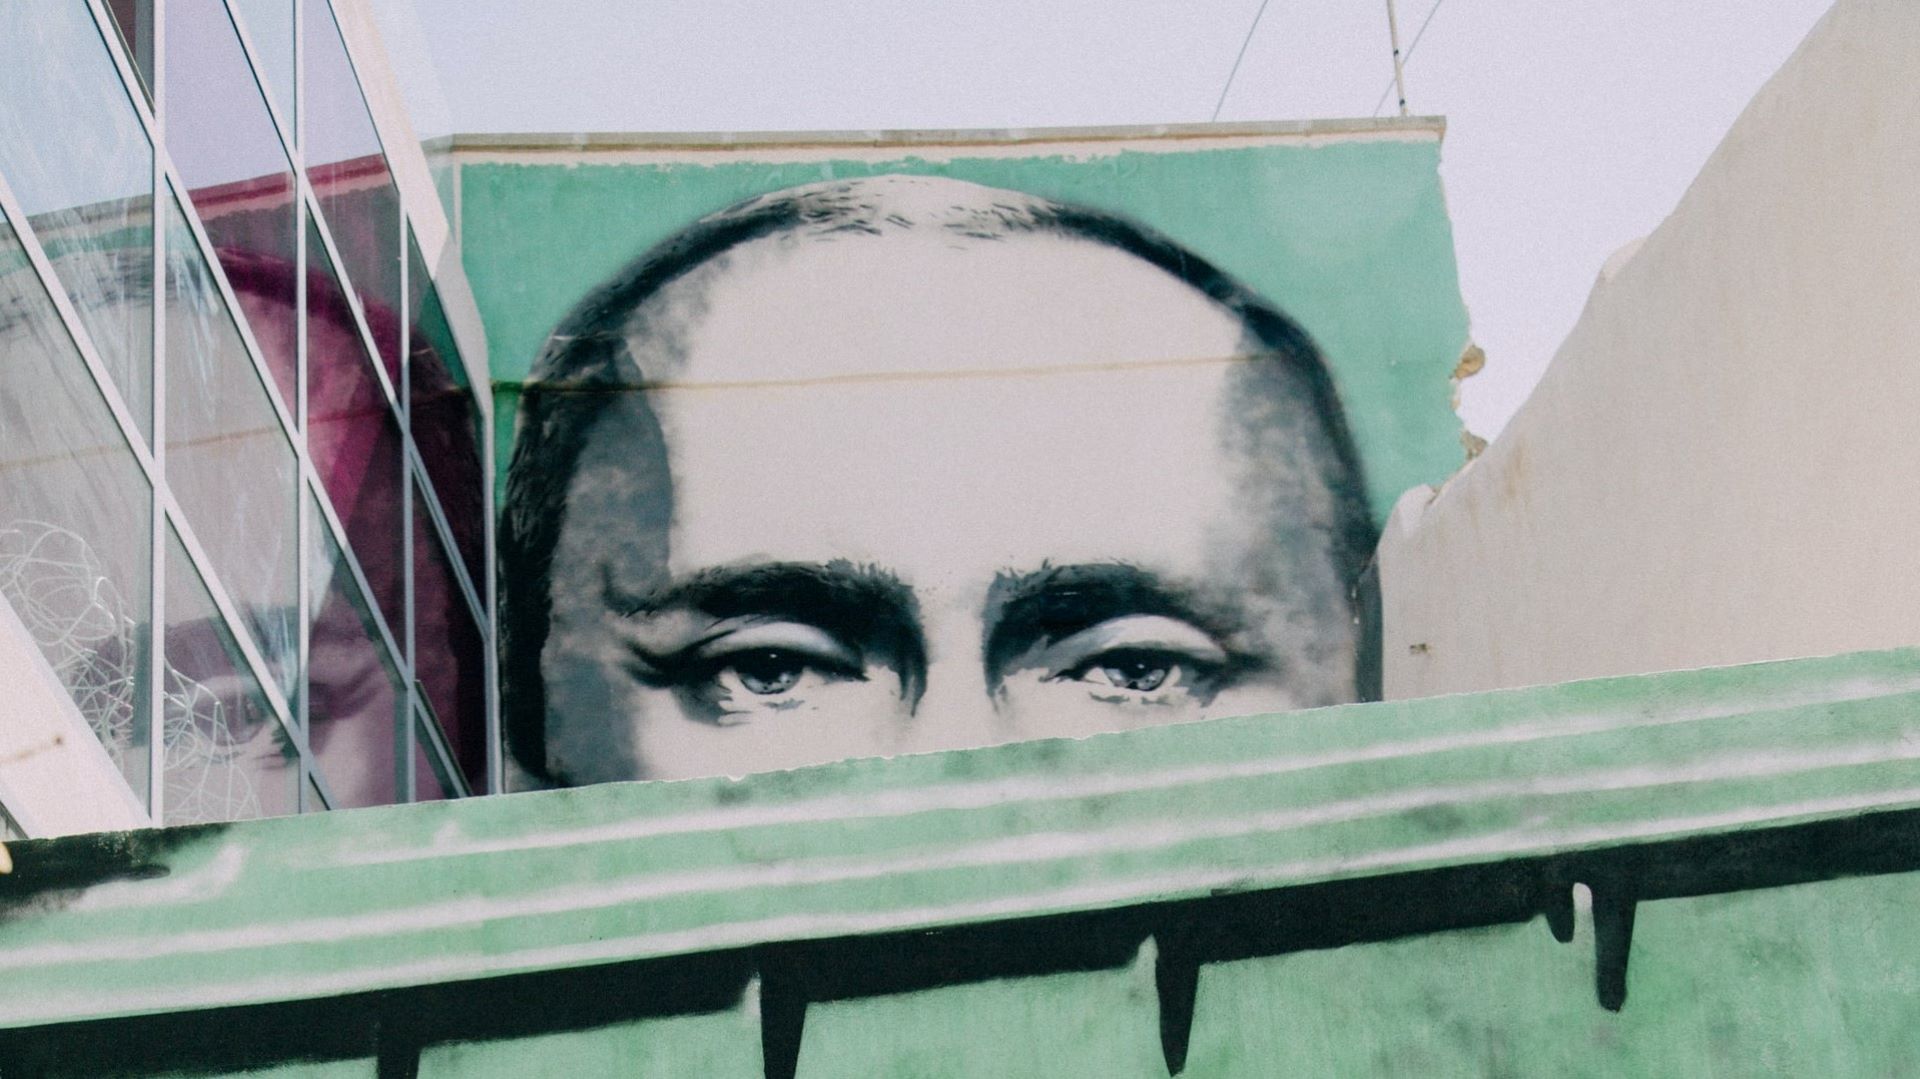 Our Director of Alumni Programs, Jorge Jraissati, gives his thoughts on the ideology of Vladimir Putin, its history, and its ongoing effects.